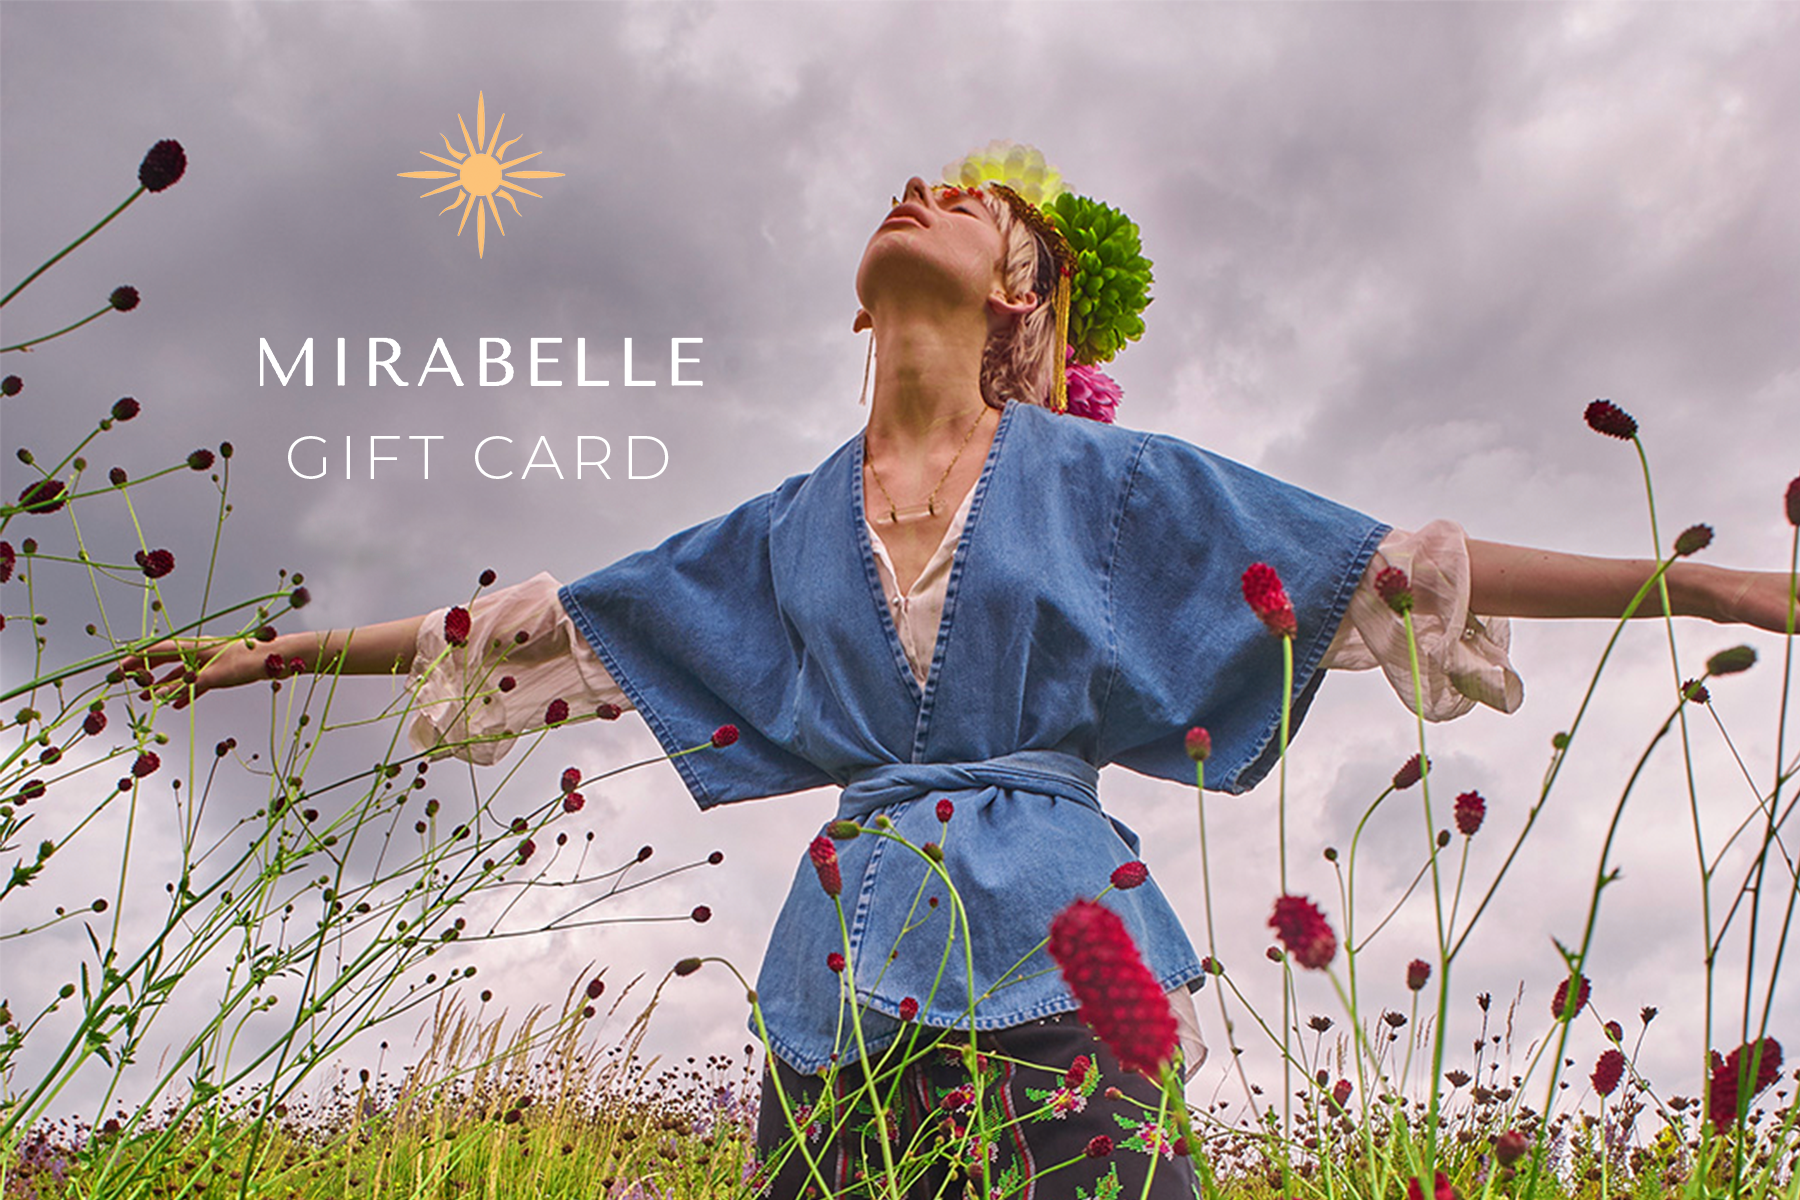 Mirabelle Gift Card